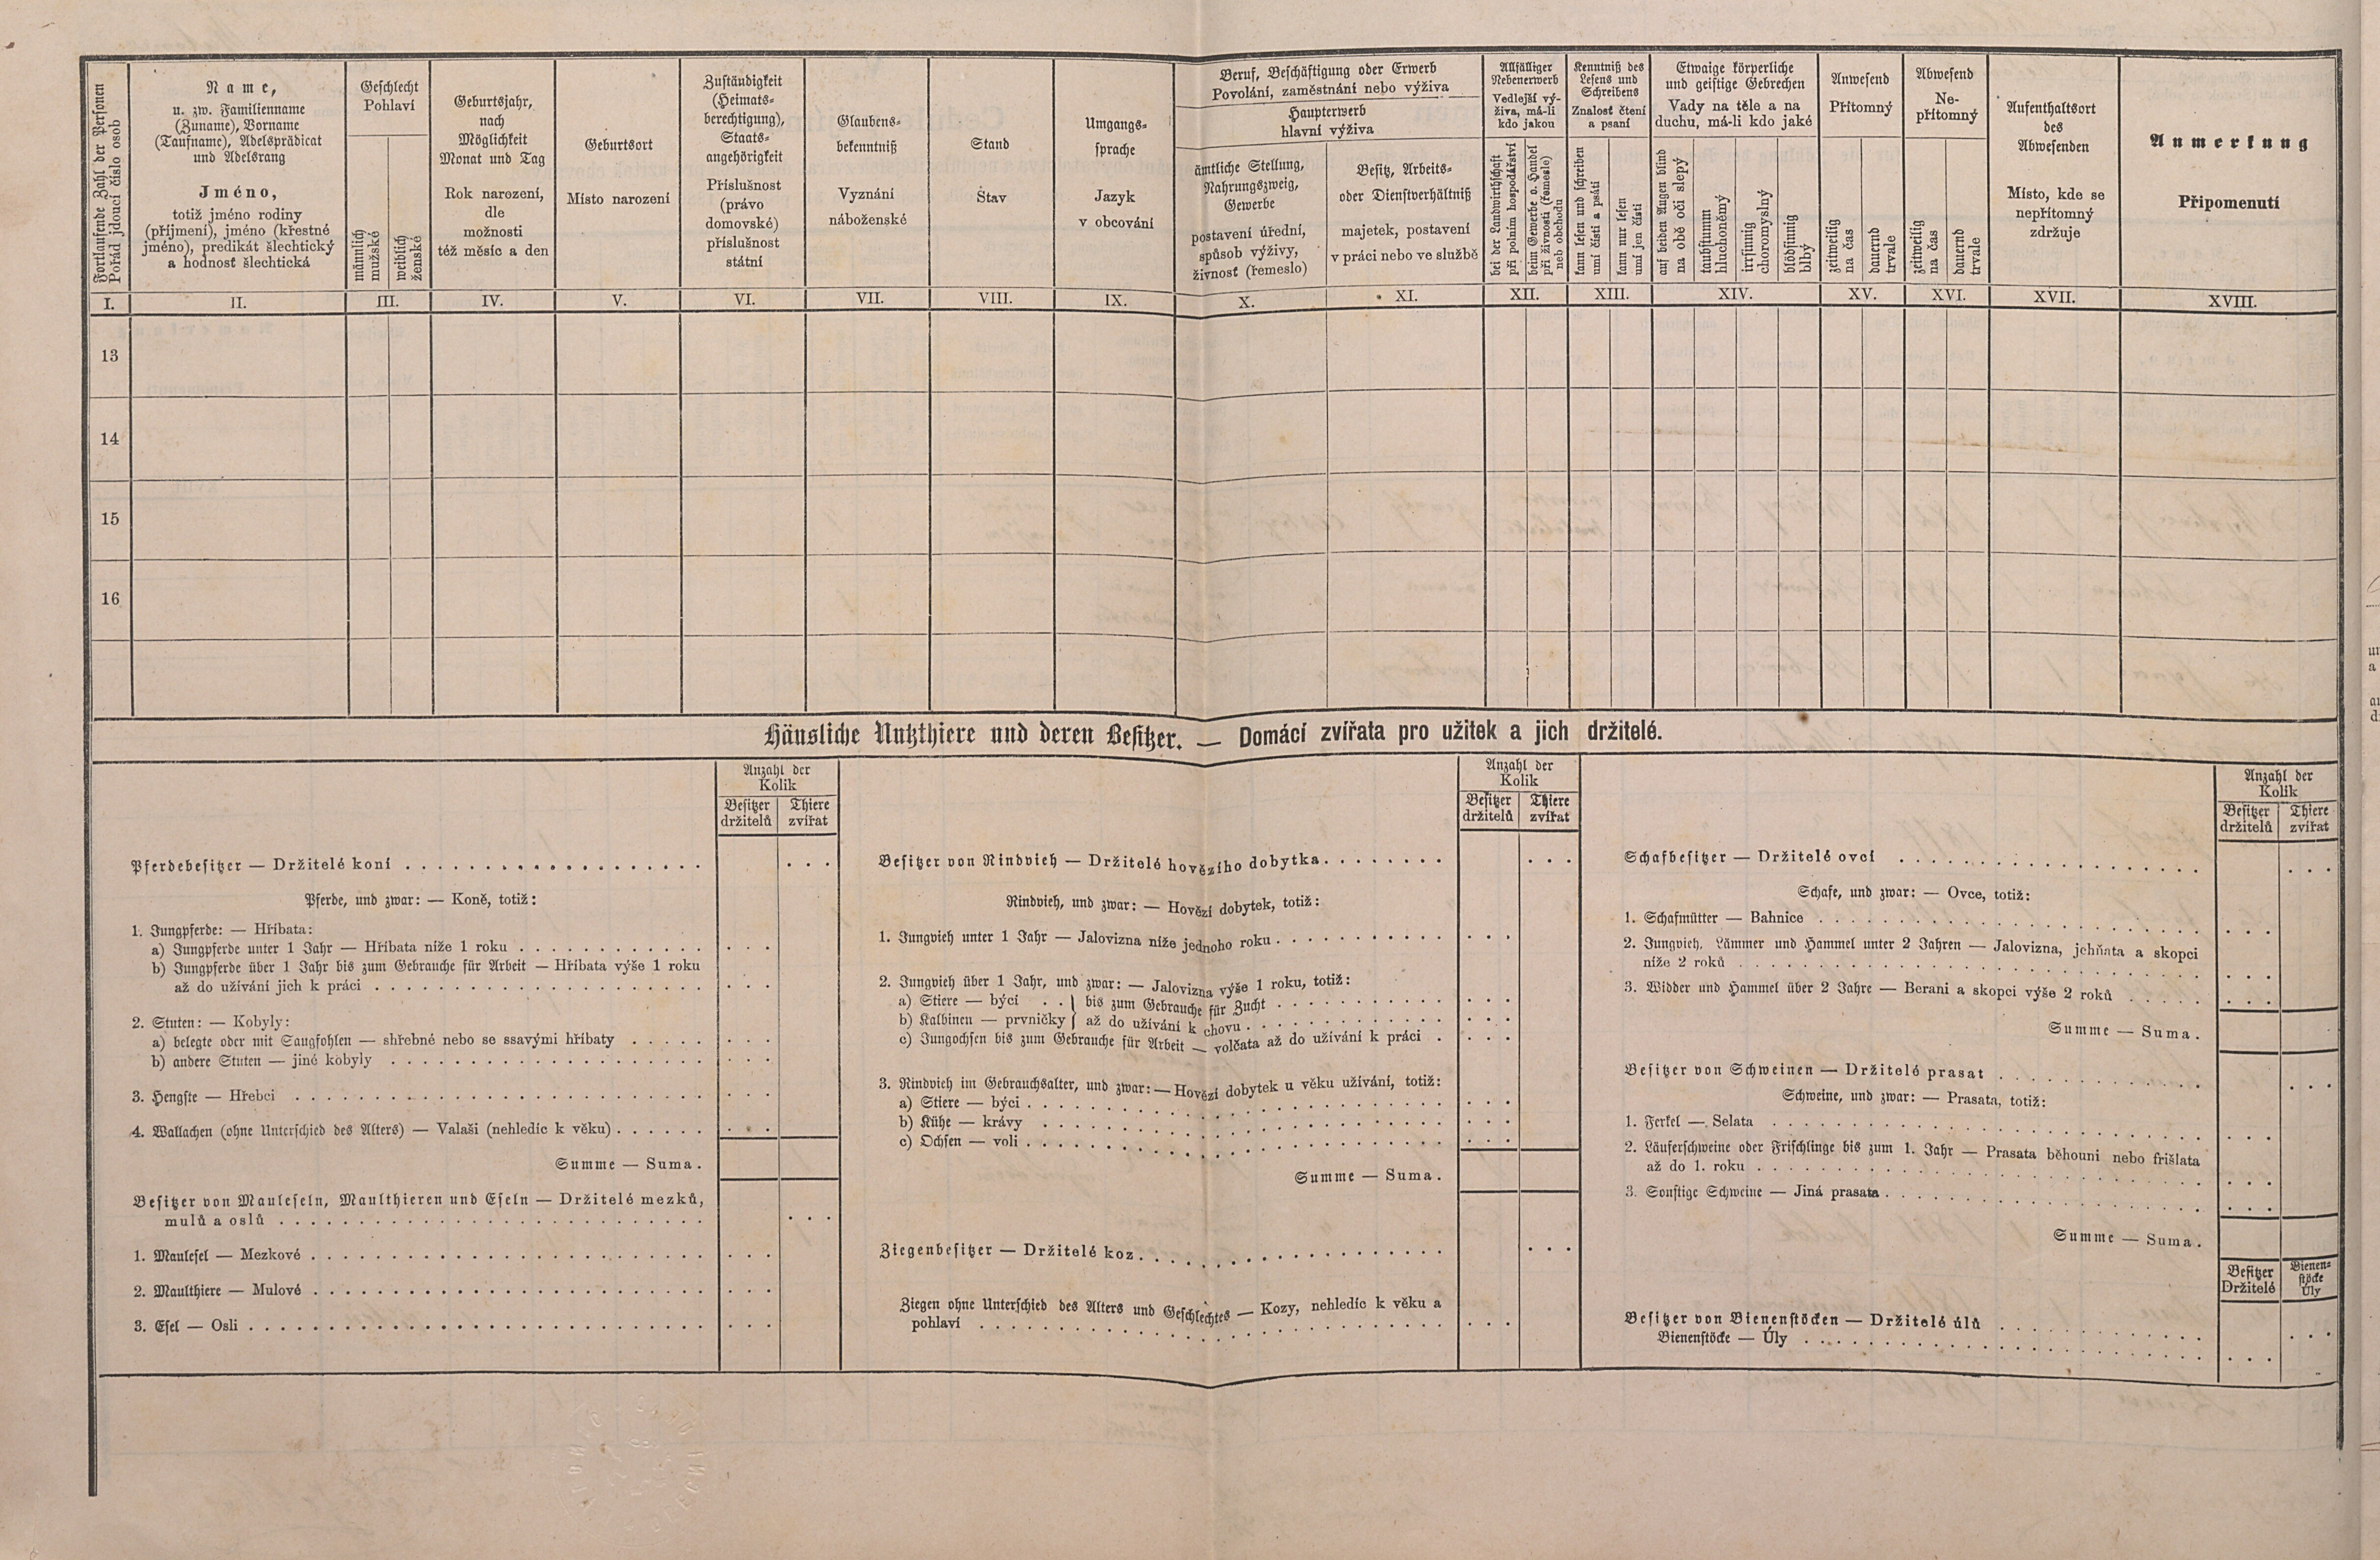 14. soap-kt_01159_census-1880-malonice-cp001_0140